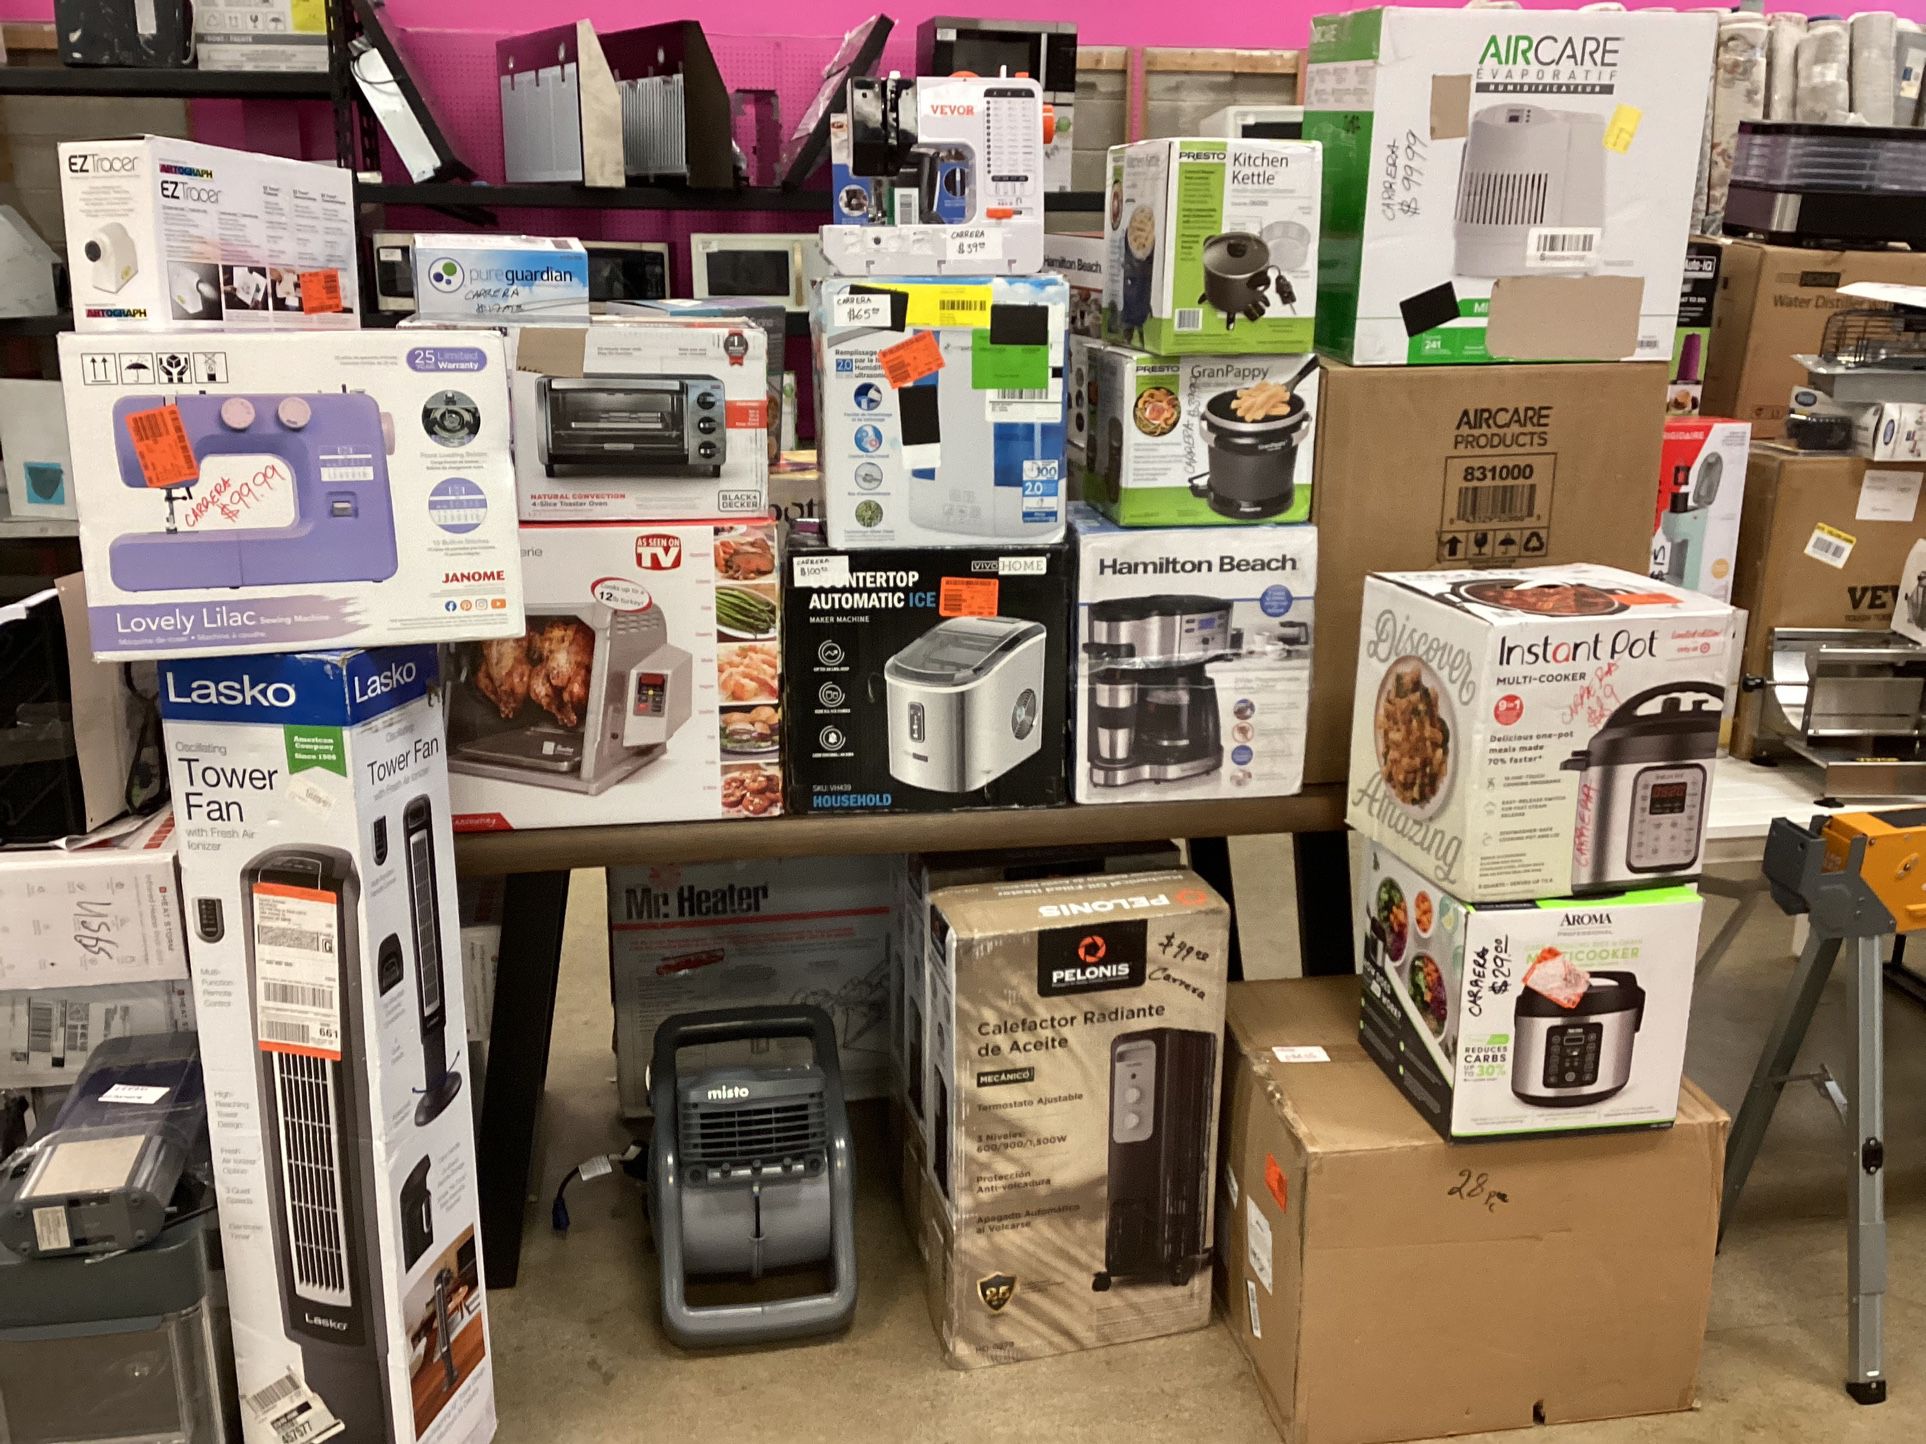 Small Heaters And Small Kitchen Appliances Starting At $29